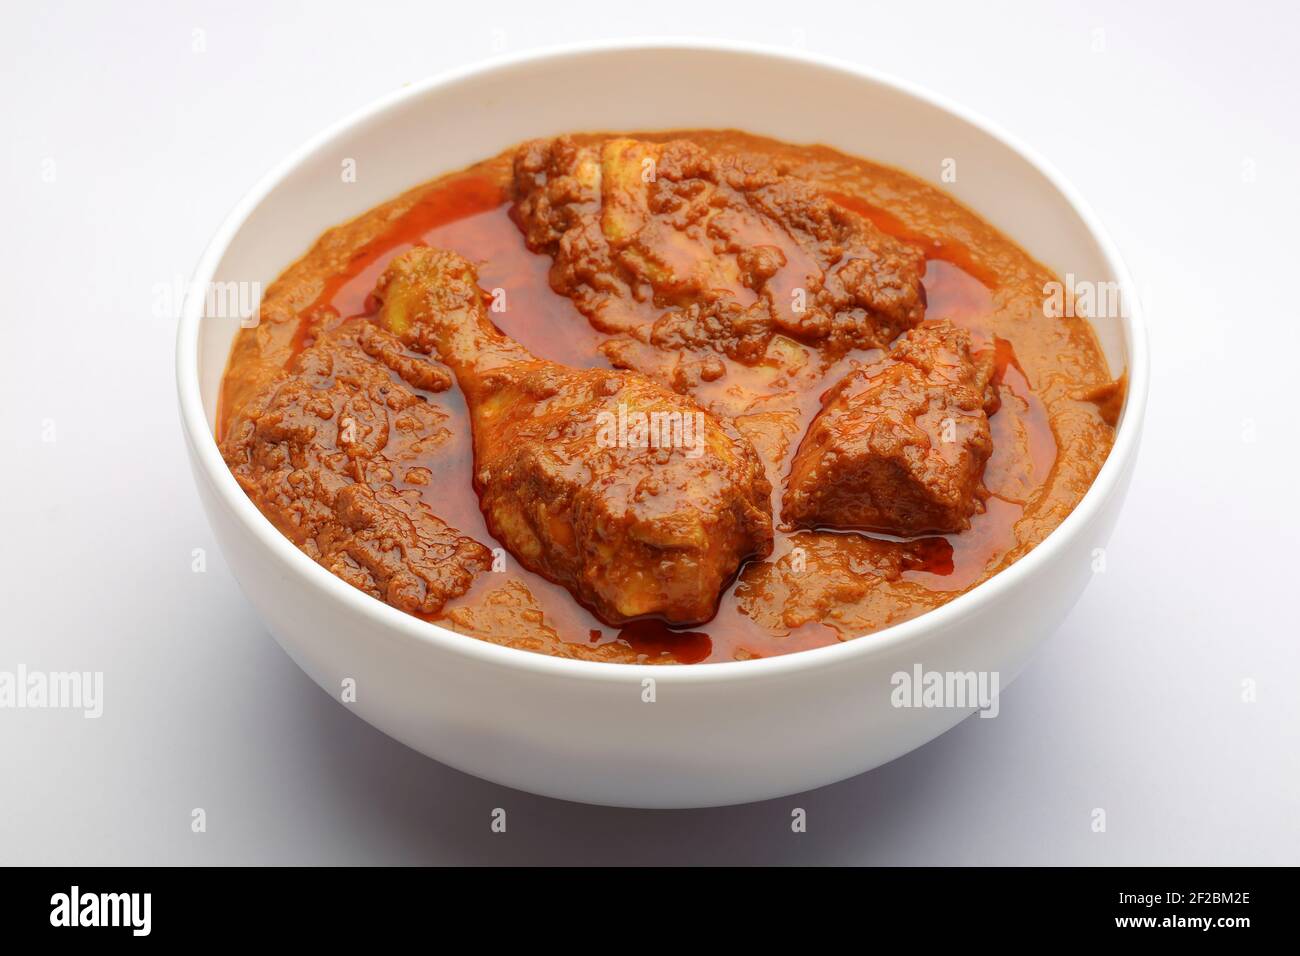 Chicken curry or masala , spicy chicken curry made using fried coconut in traditional way,arranged in a white ceramic bowl with white background,isola Stock Photo